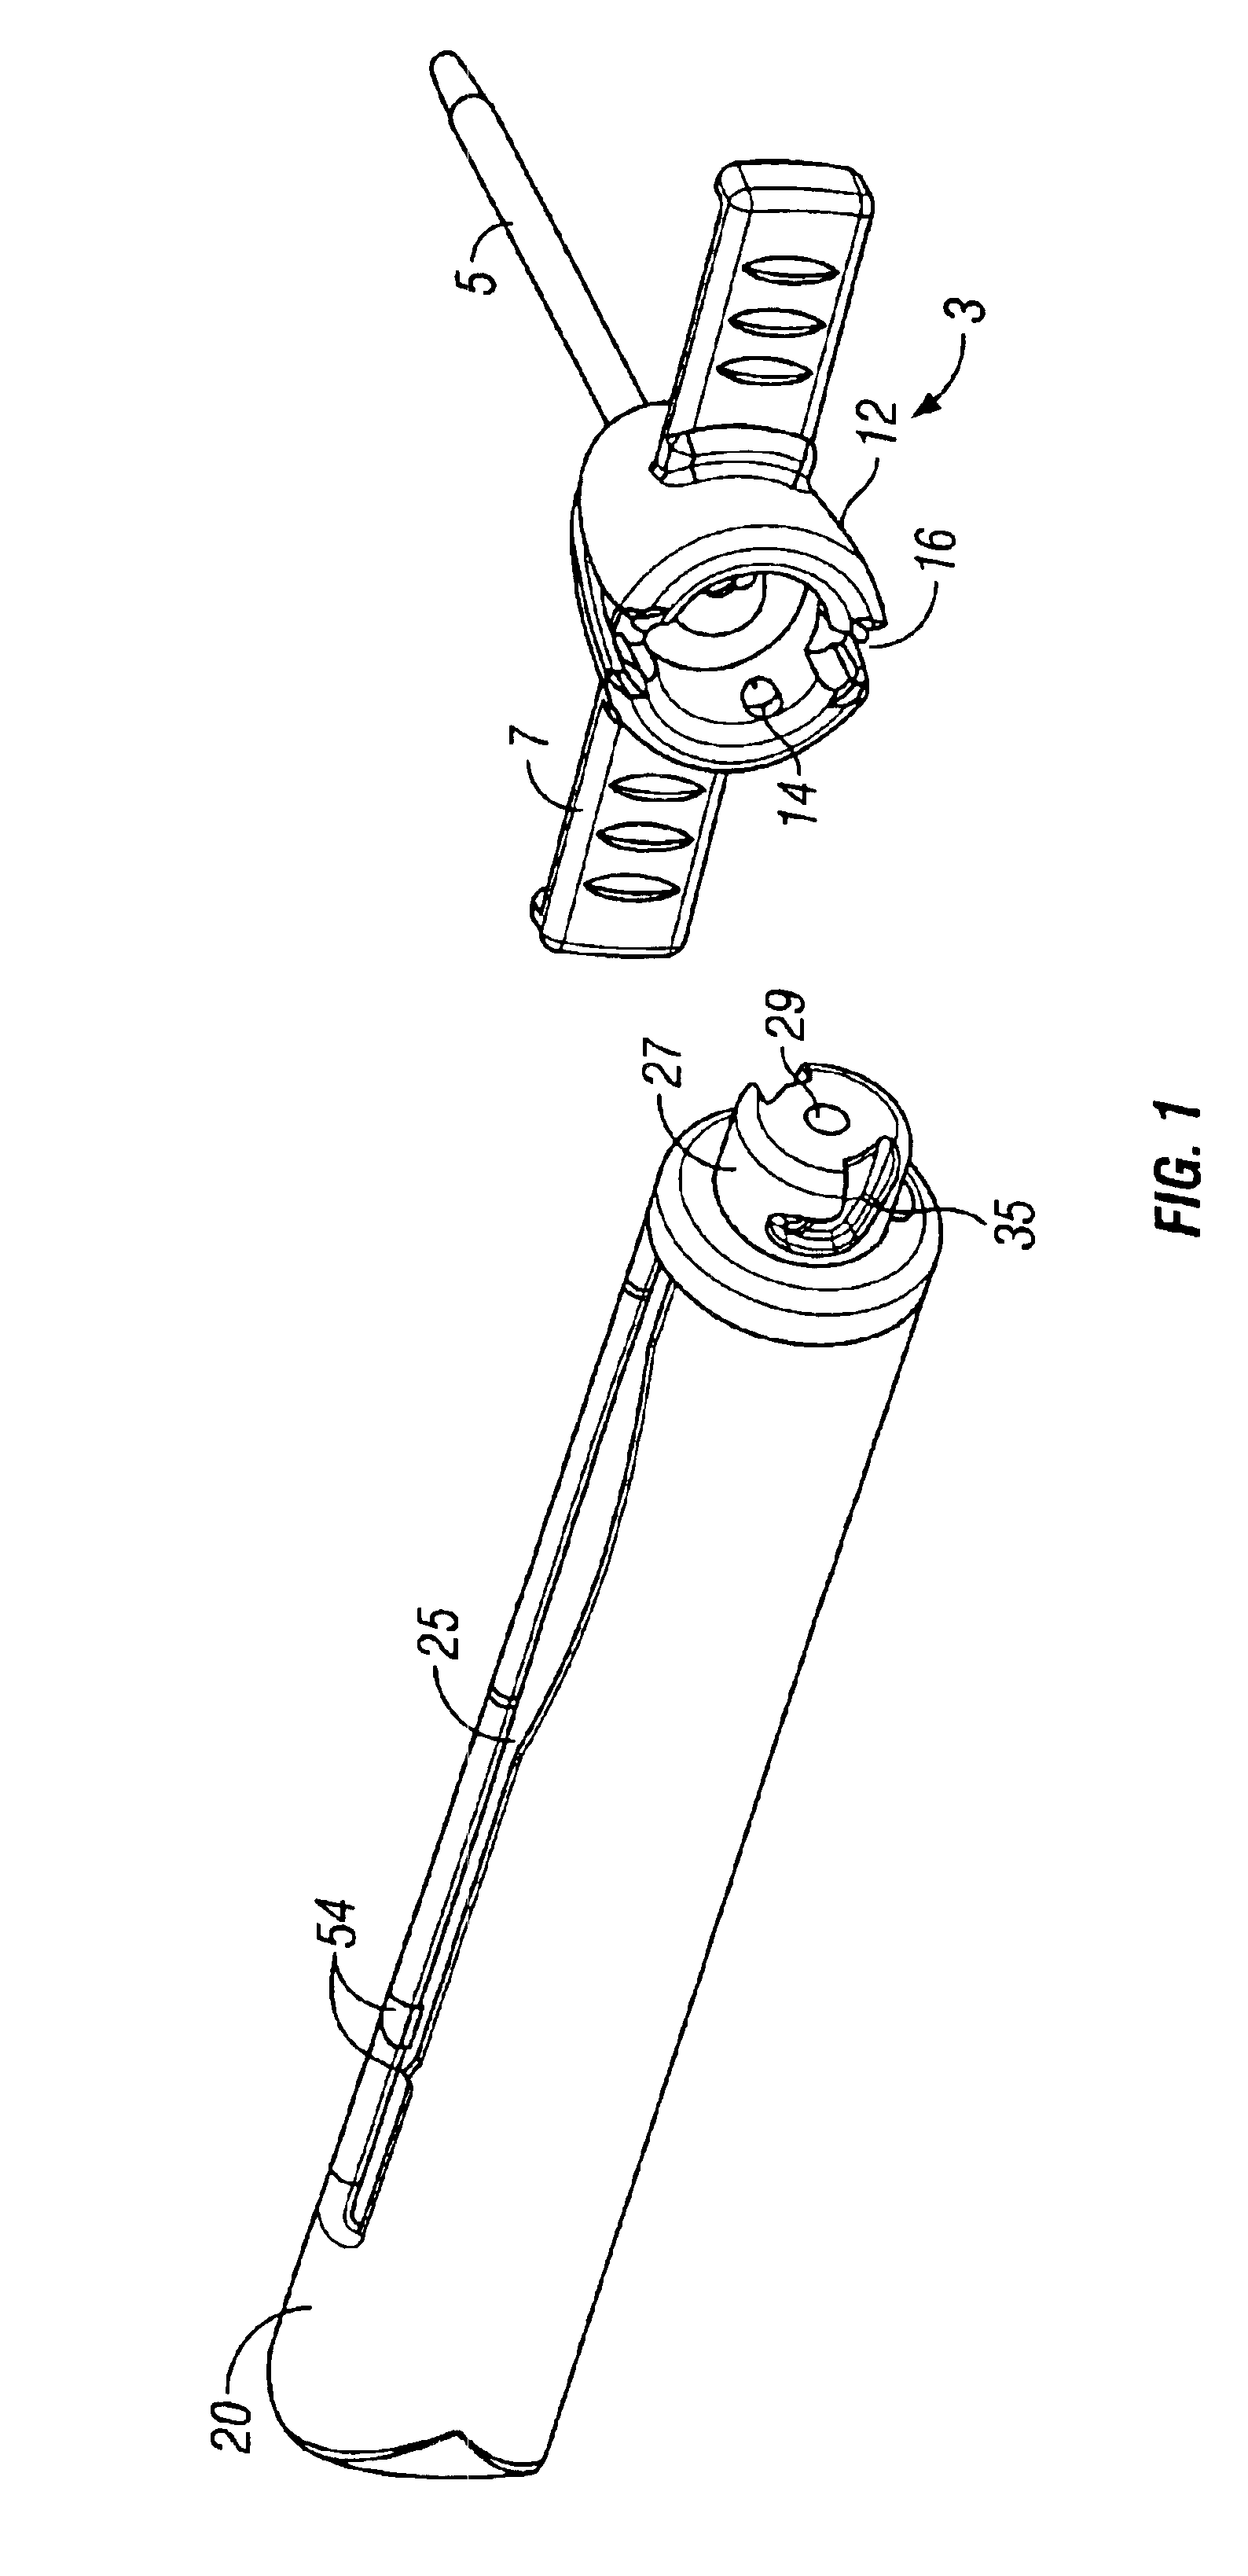 Safety needle assembly with locking retraction